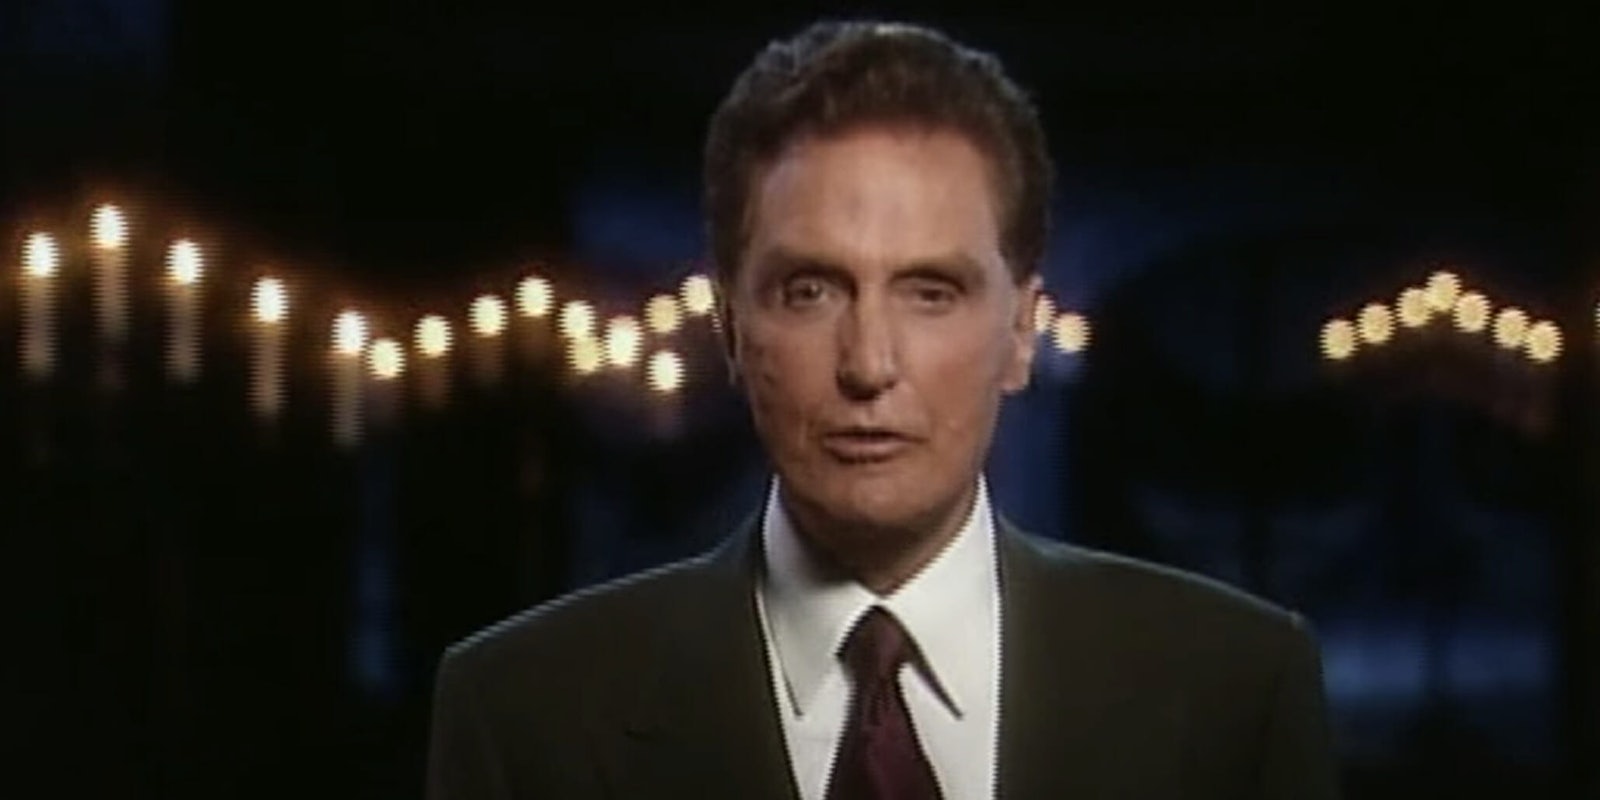 Netflix is bringing back 'Unsolved Mysteries' with its original creators and a 'Stranger Things' producer onboard.